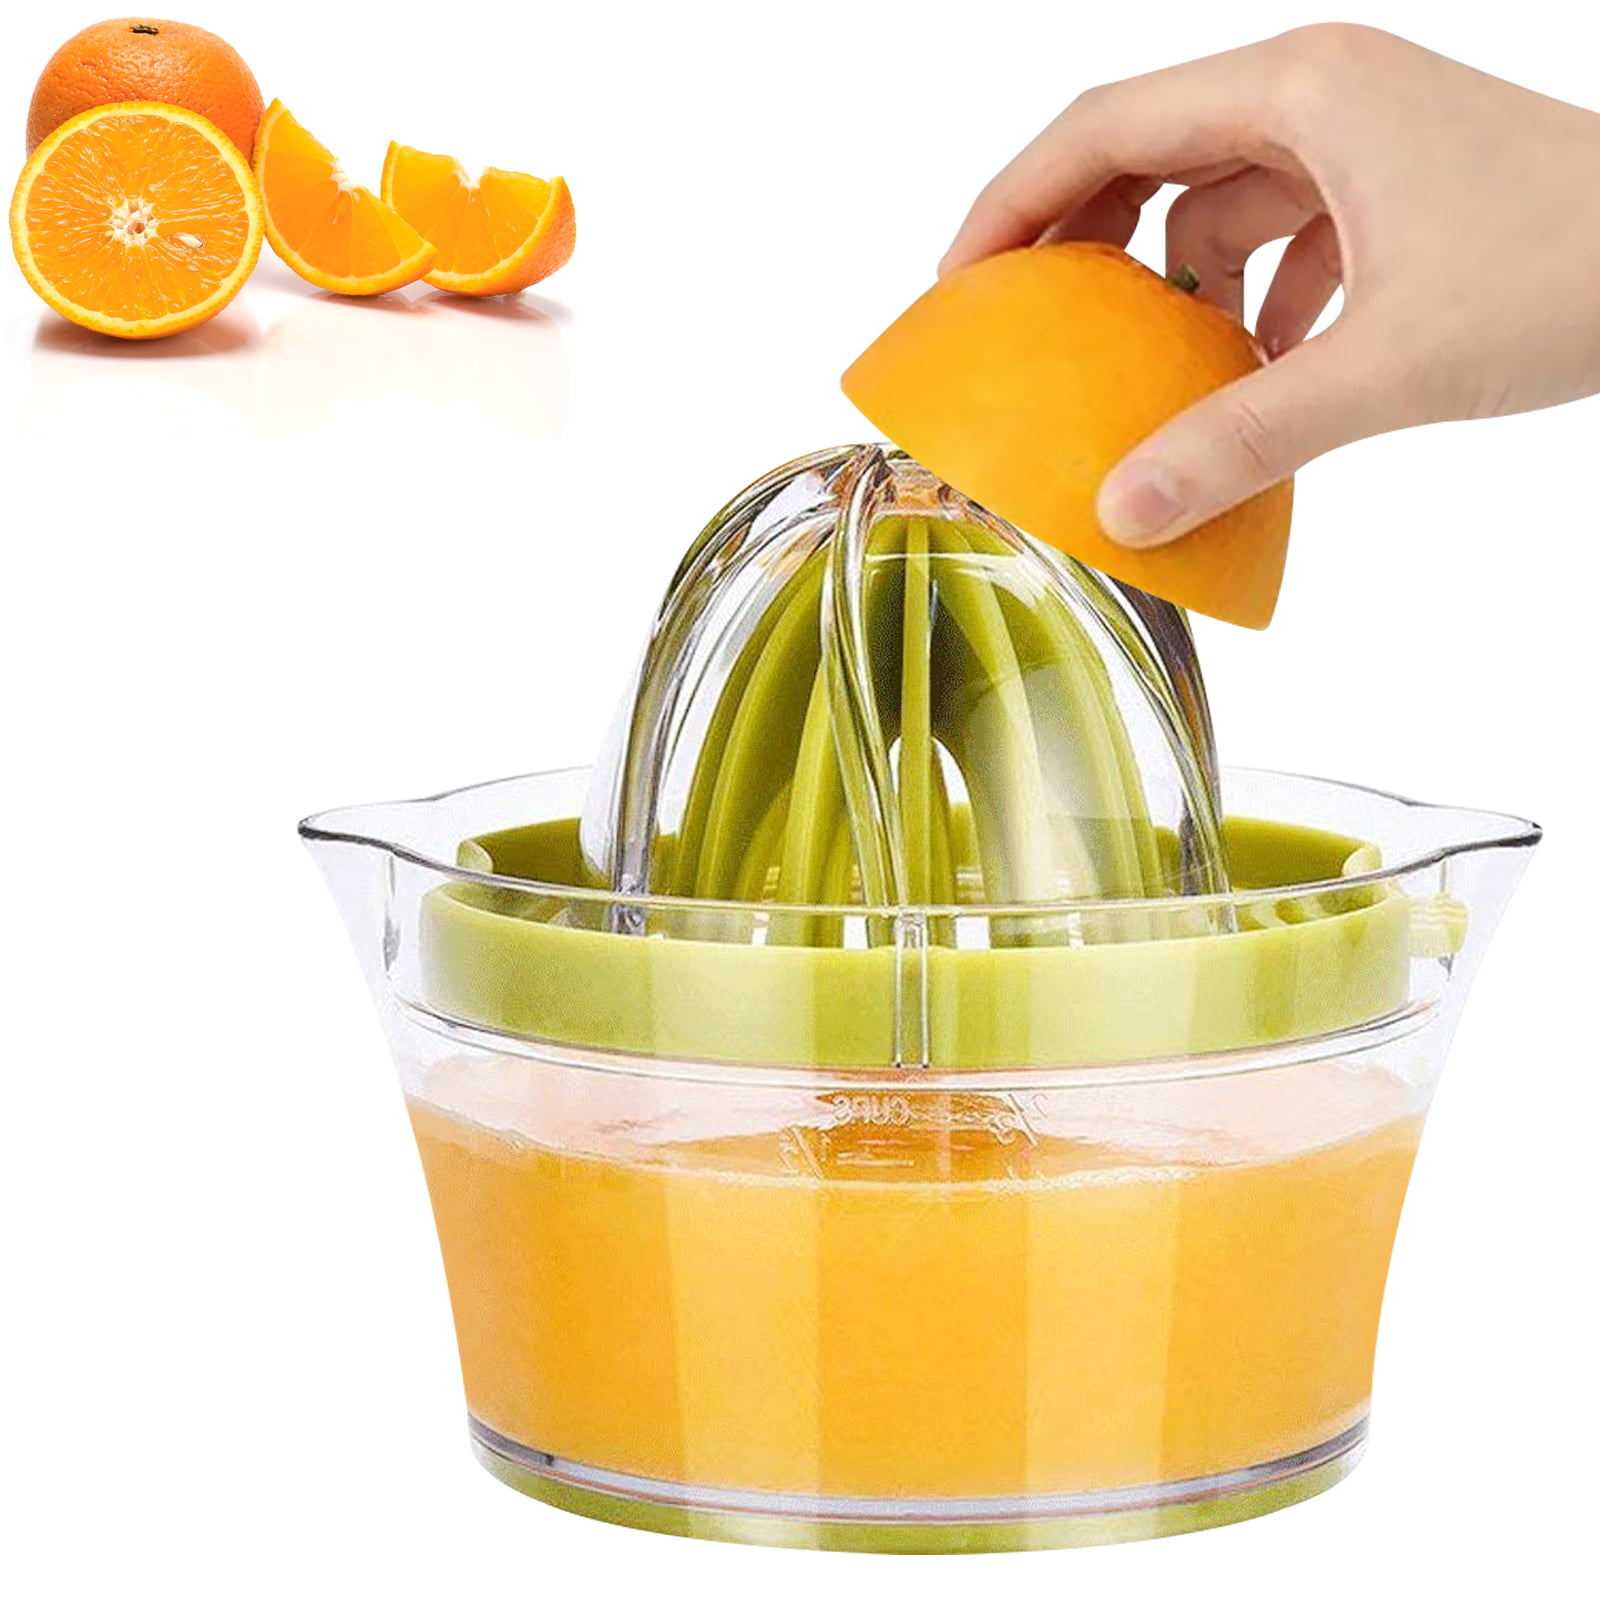 Lemon Orange Juicer 4 in 1 Multi-Function Manual Juicer Squeezers Hand Juicer Squeezer with Built-in Measuring Cup and Grater and Egg Separator 